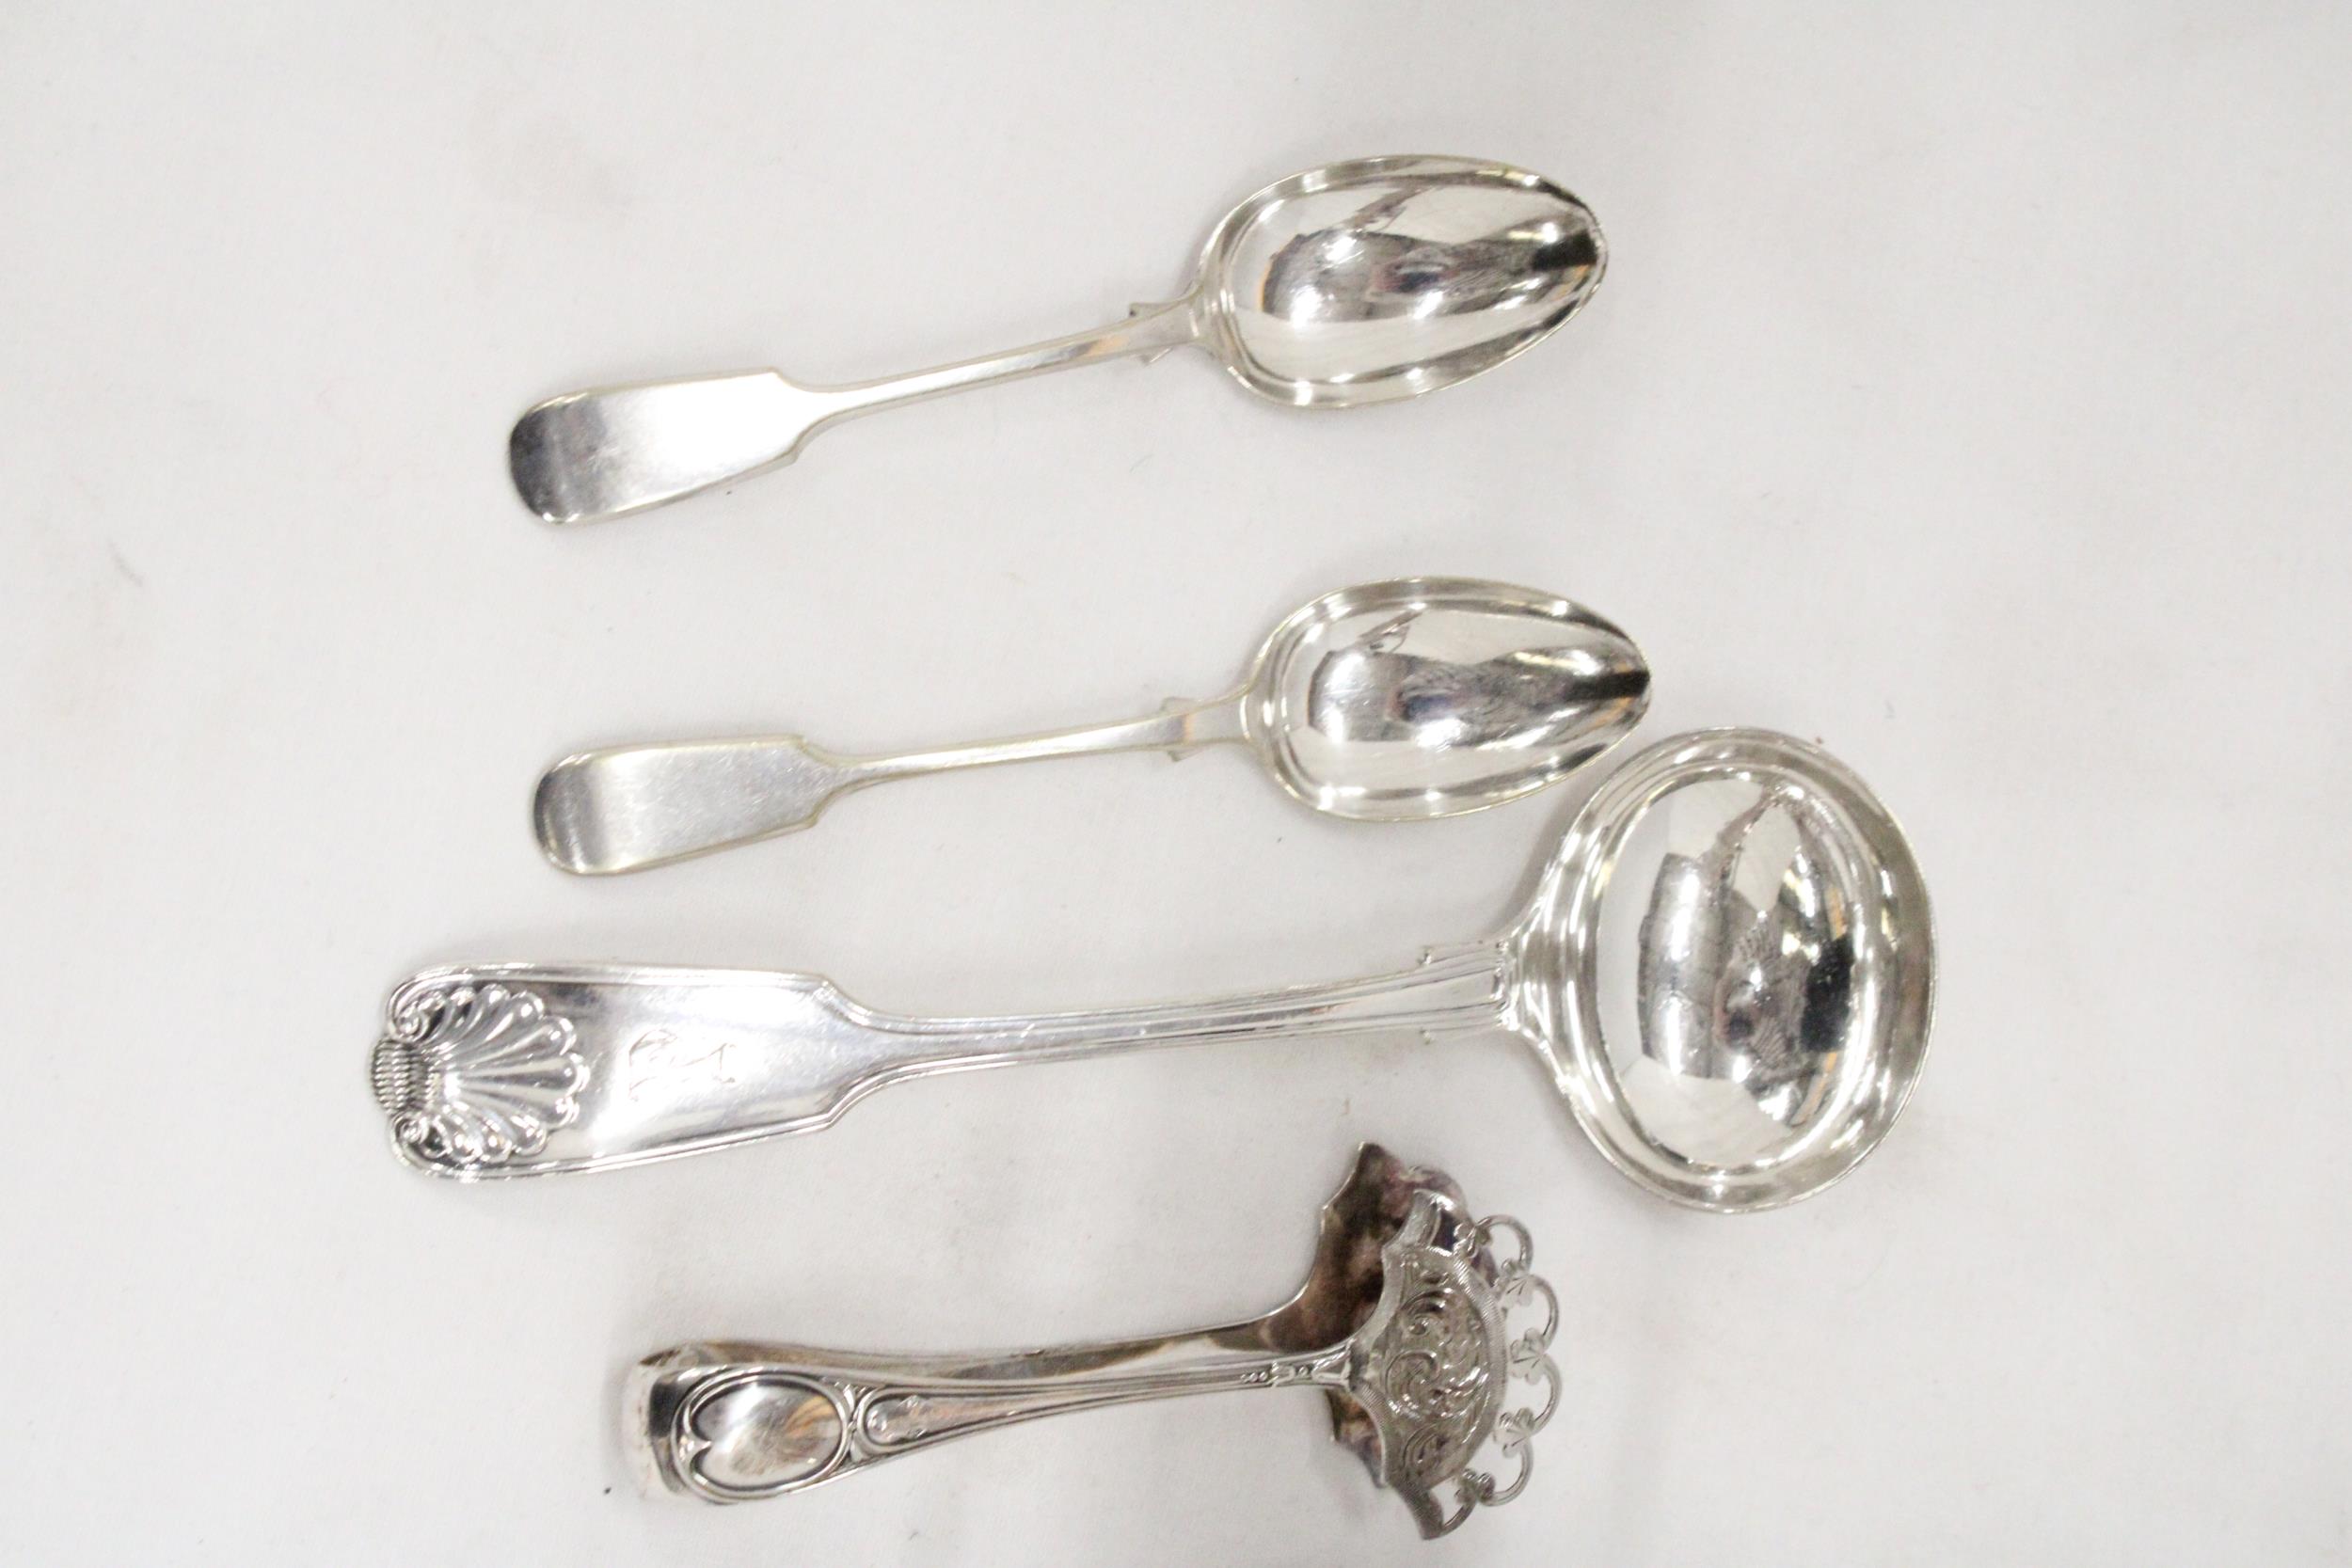 A MIXED LOT OF SILVER PLATE TO INCLUDE TWO TEA SPOONS, LADEL, SMALL TONGS PLUS A CANDELABRA - Image 2 of 6